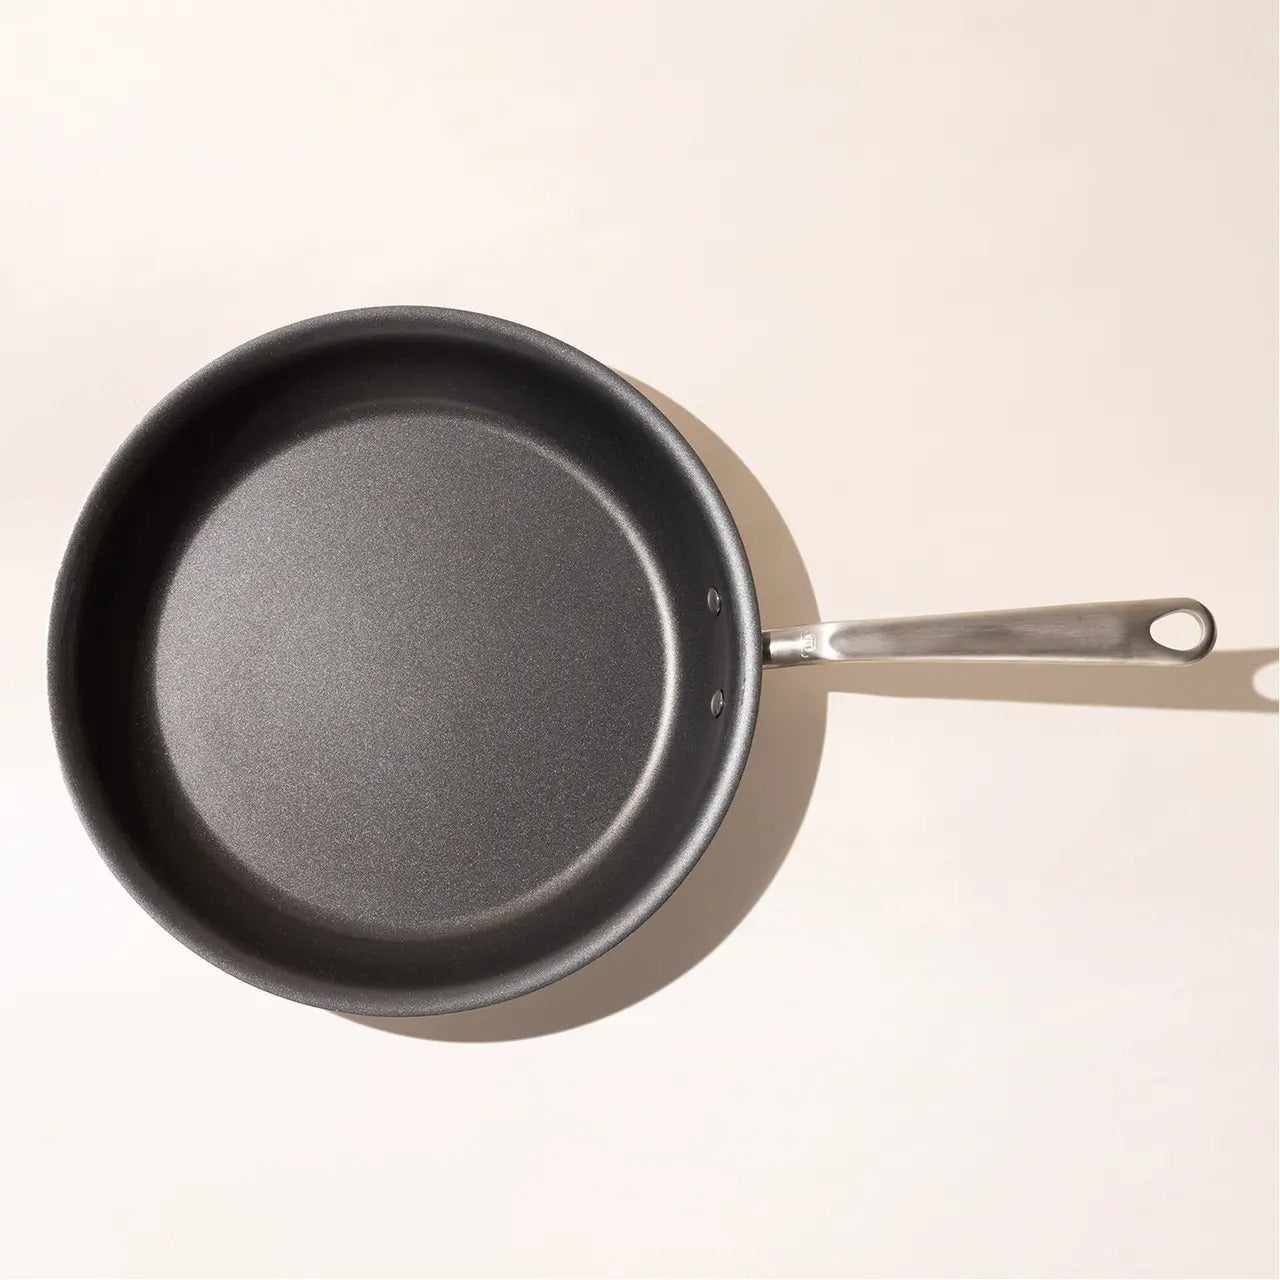 MADE IN Nonstick Fry Pan, Graphite - 8", 10", 12"